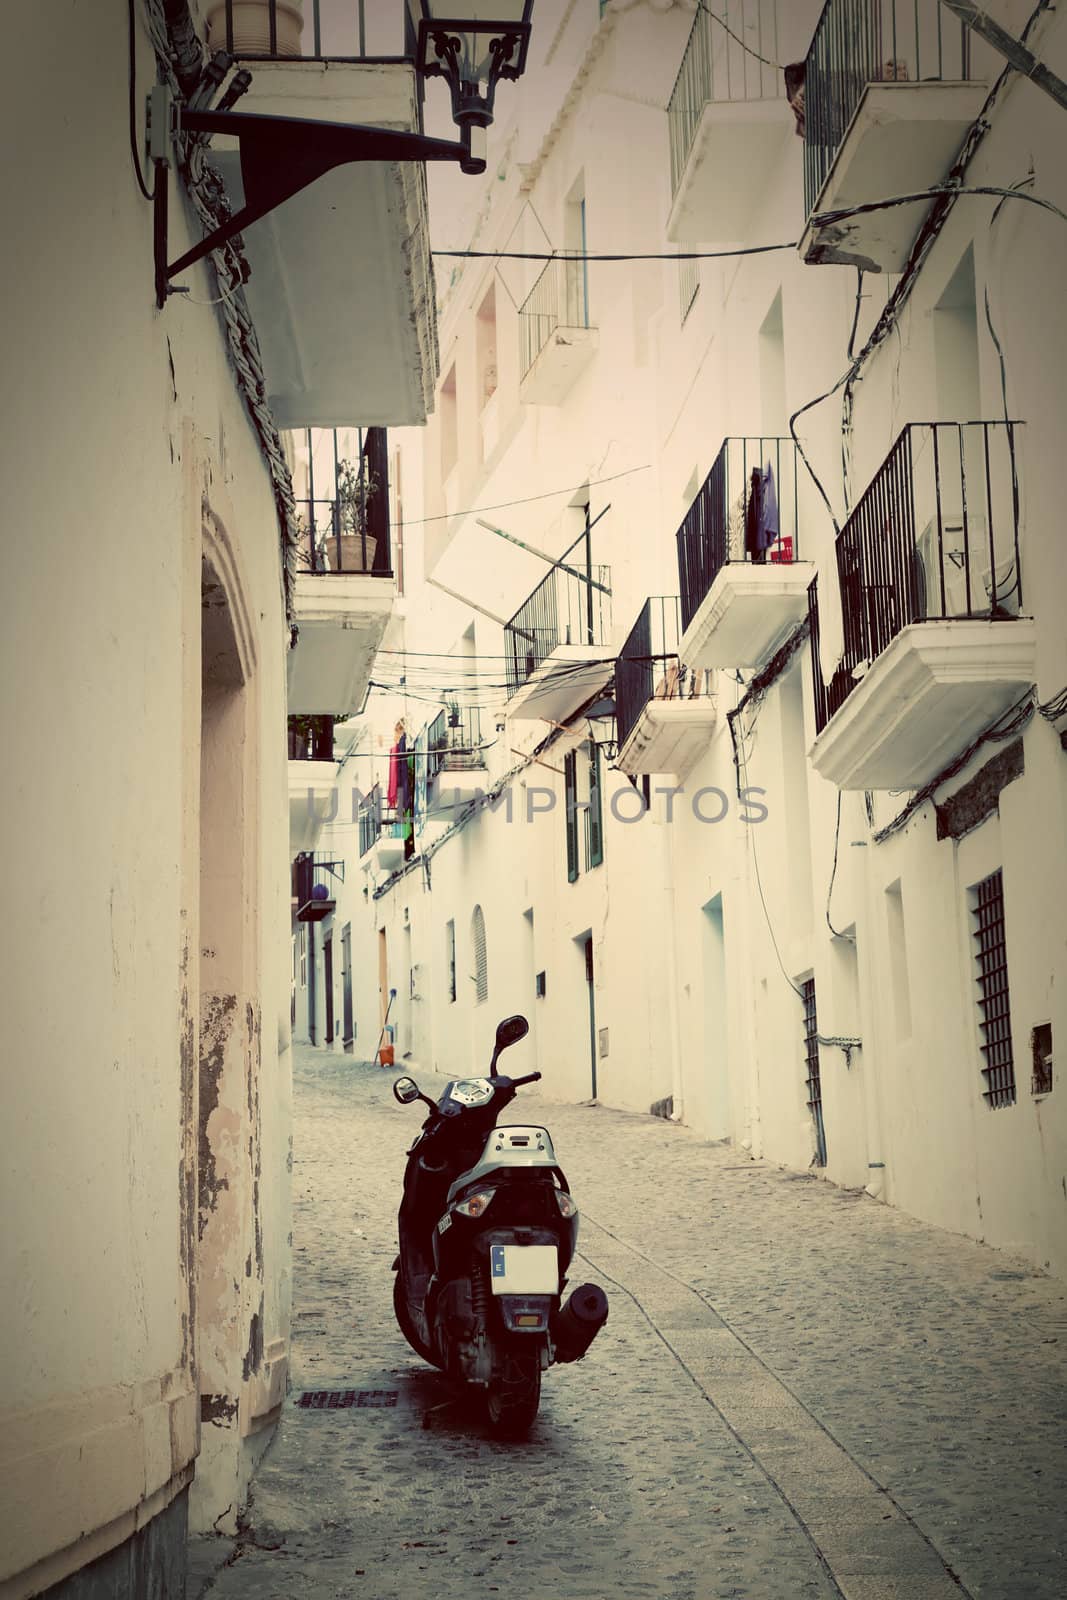 Architecture of old city of Ibiza, Spain by photocreo